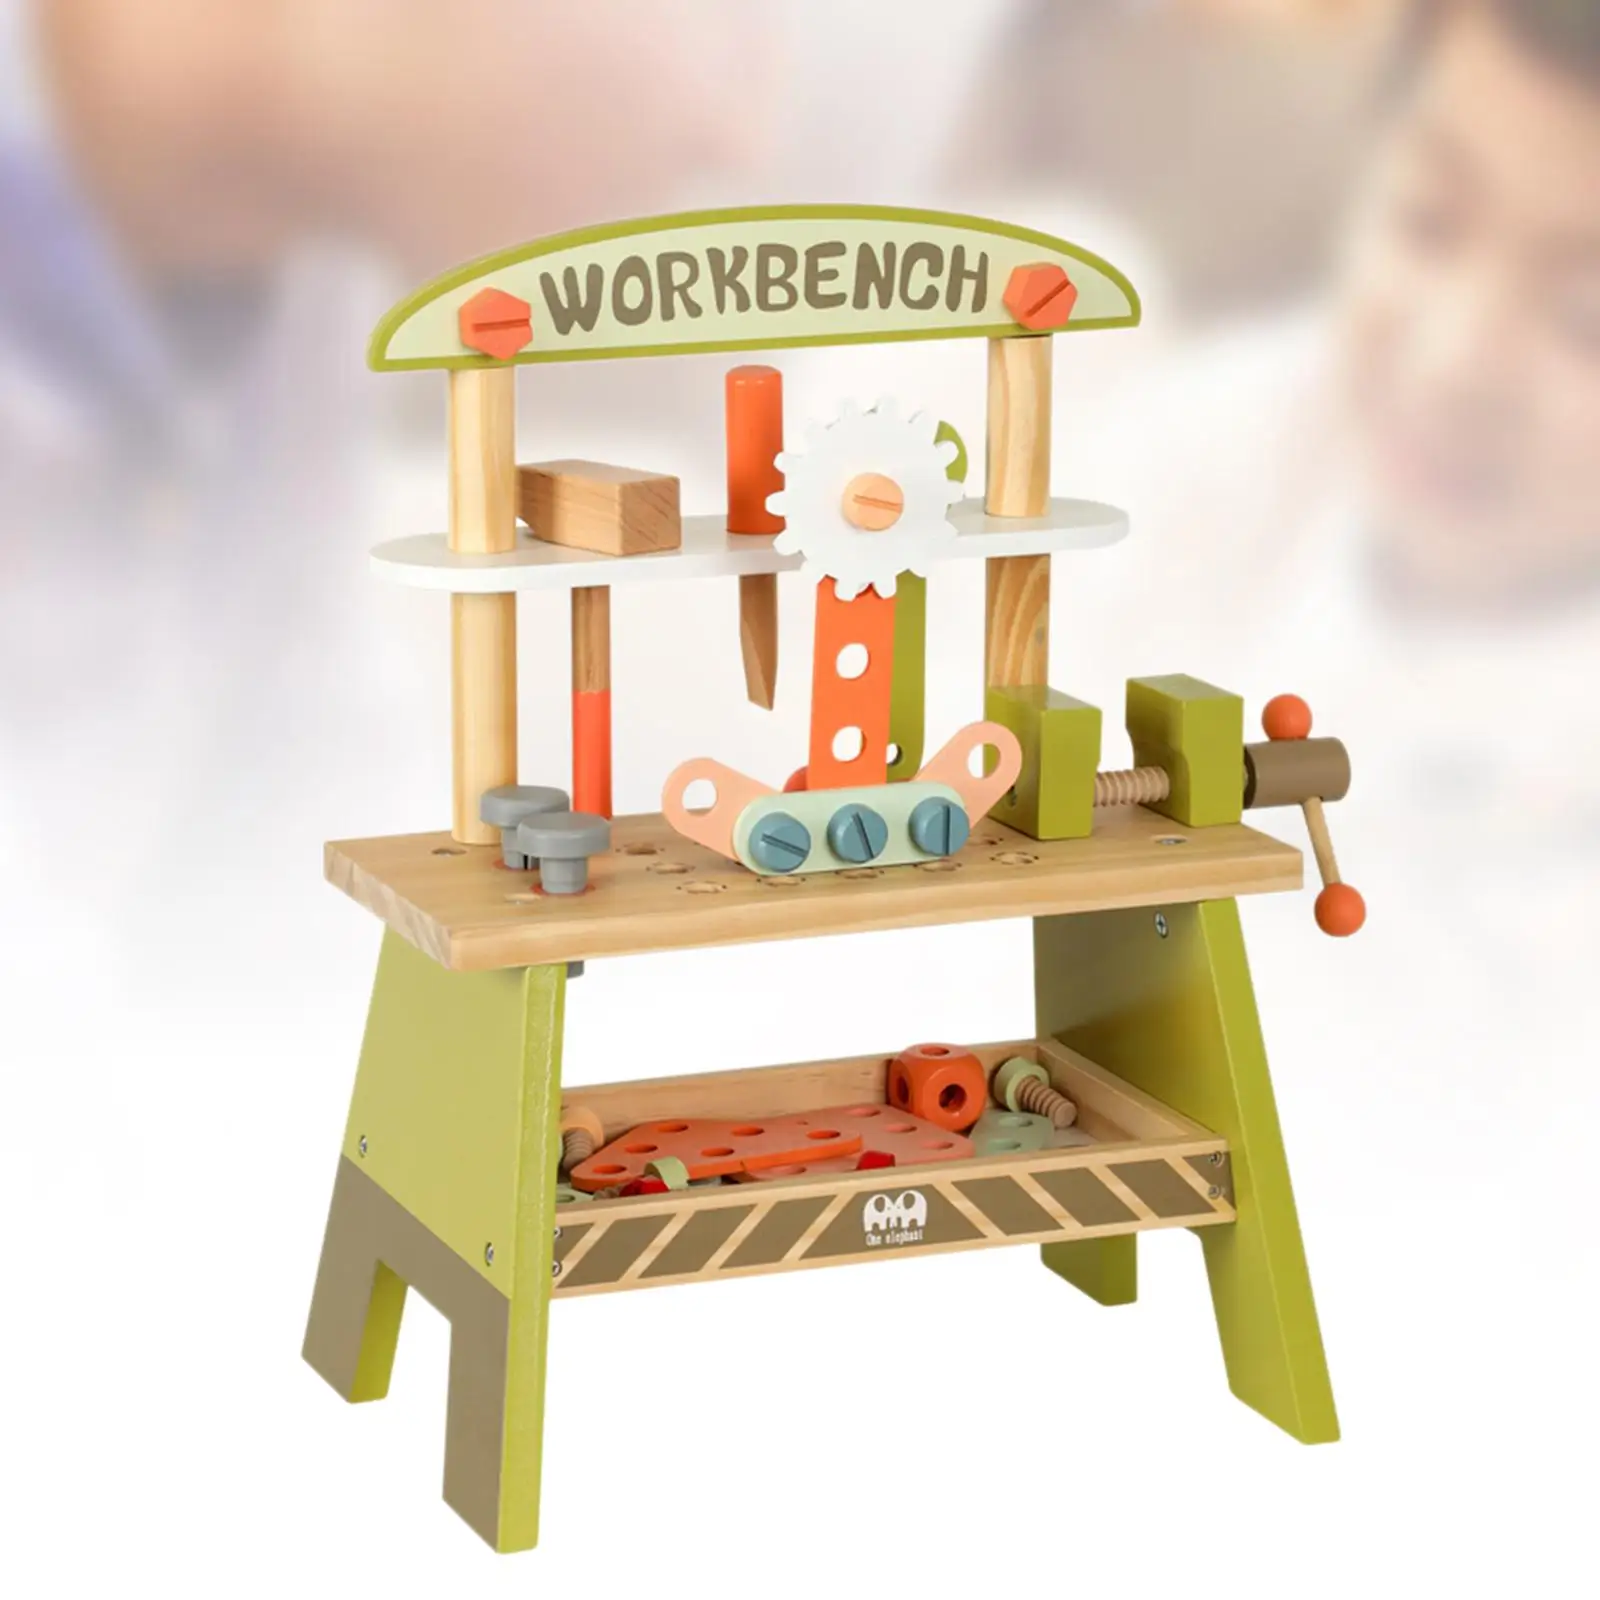 Kid`s Wooden Tool Bench Toy Playset Simulation Workshop Hand Tool Pretend Play Construction Toy for 2 3 4 5 Years Old Girls Boys